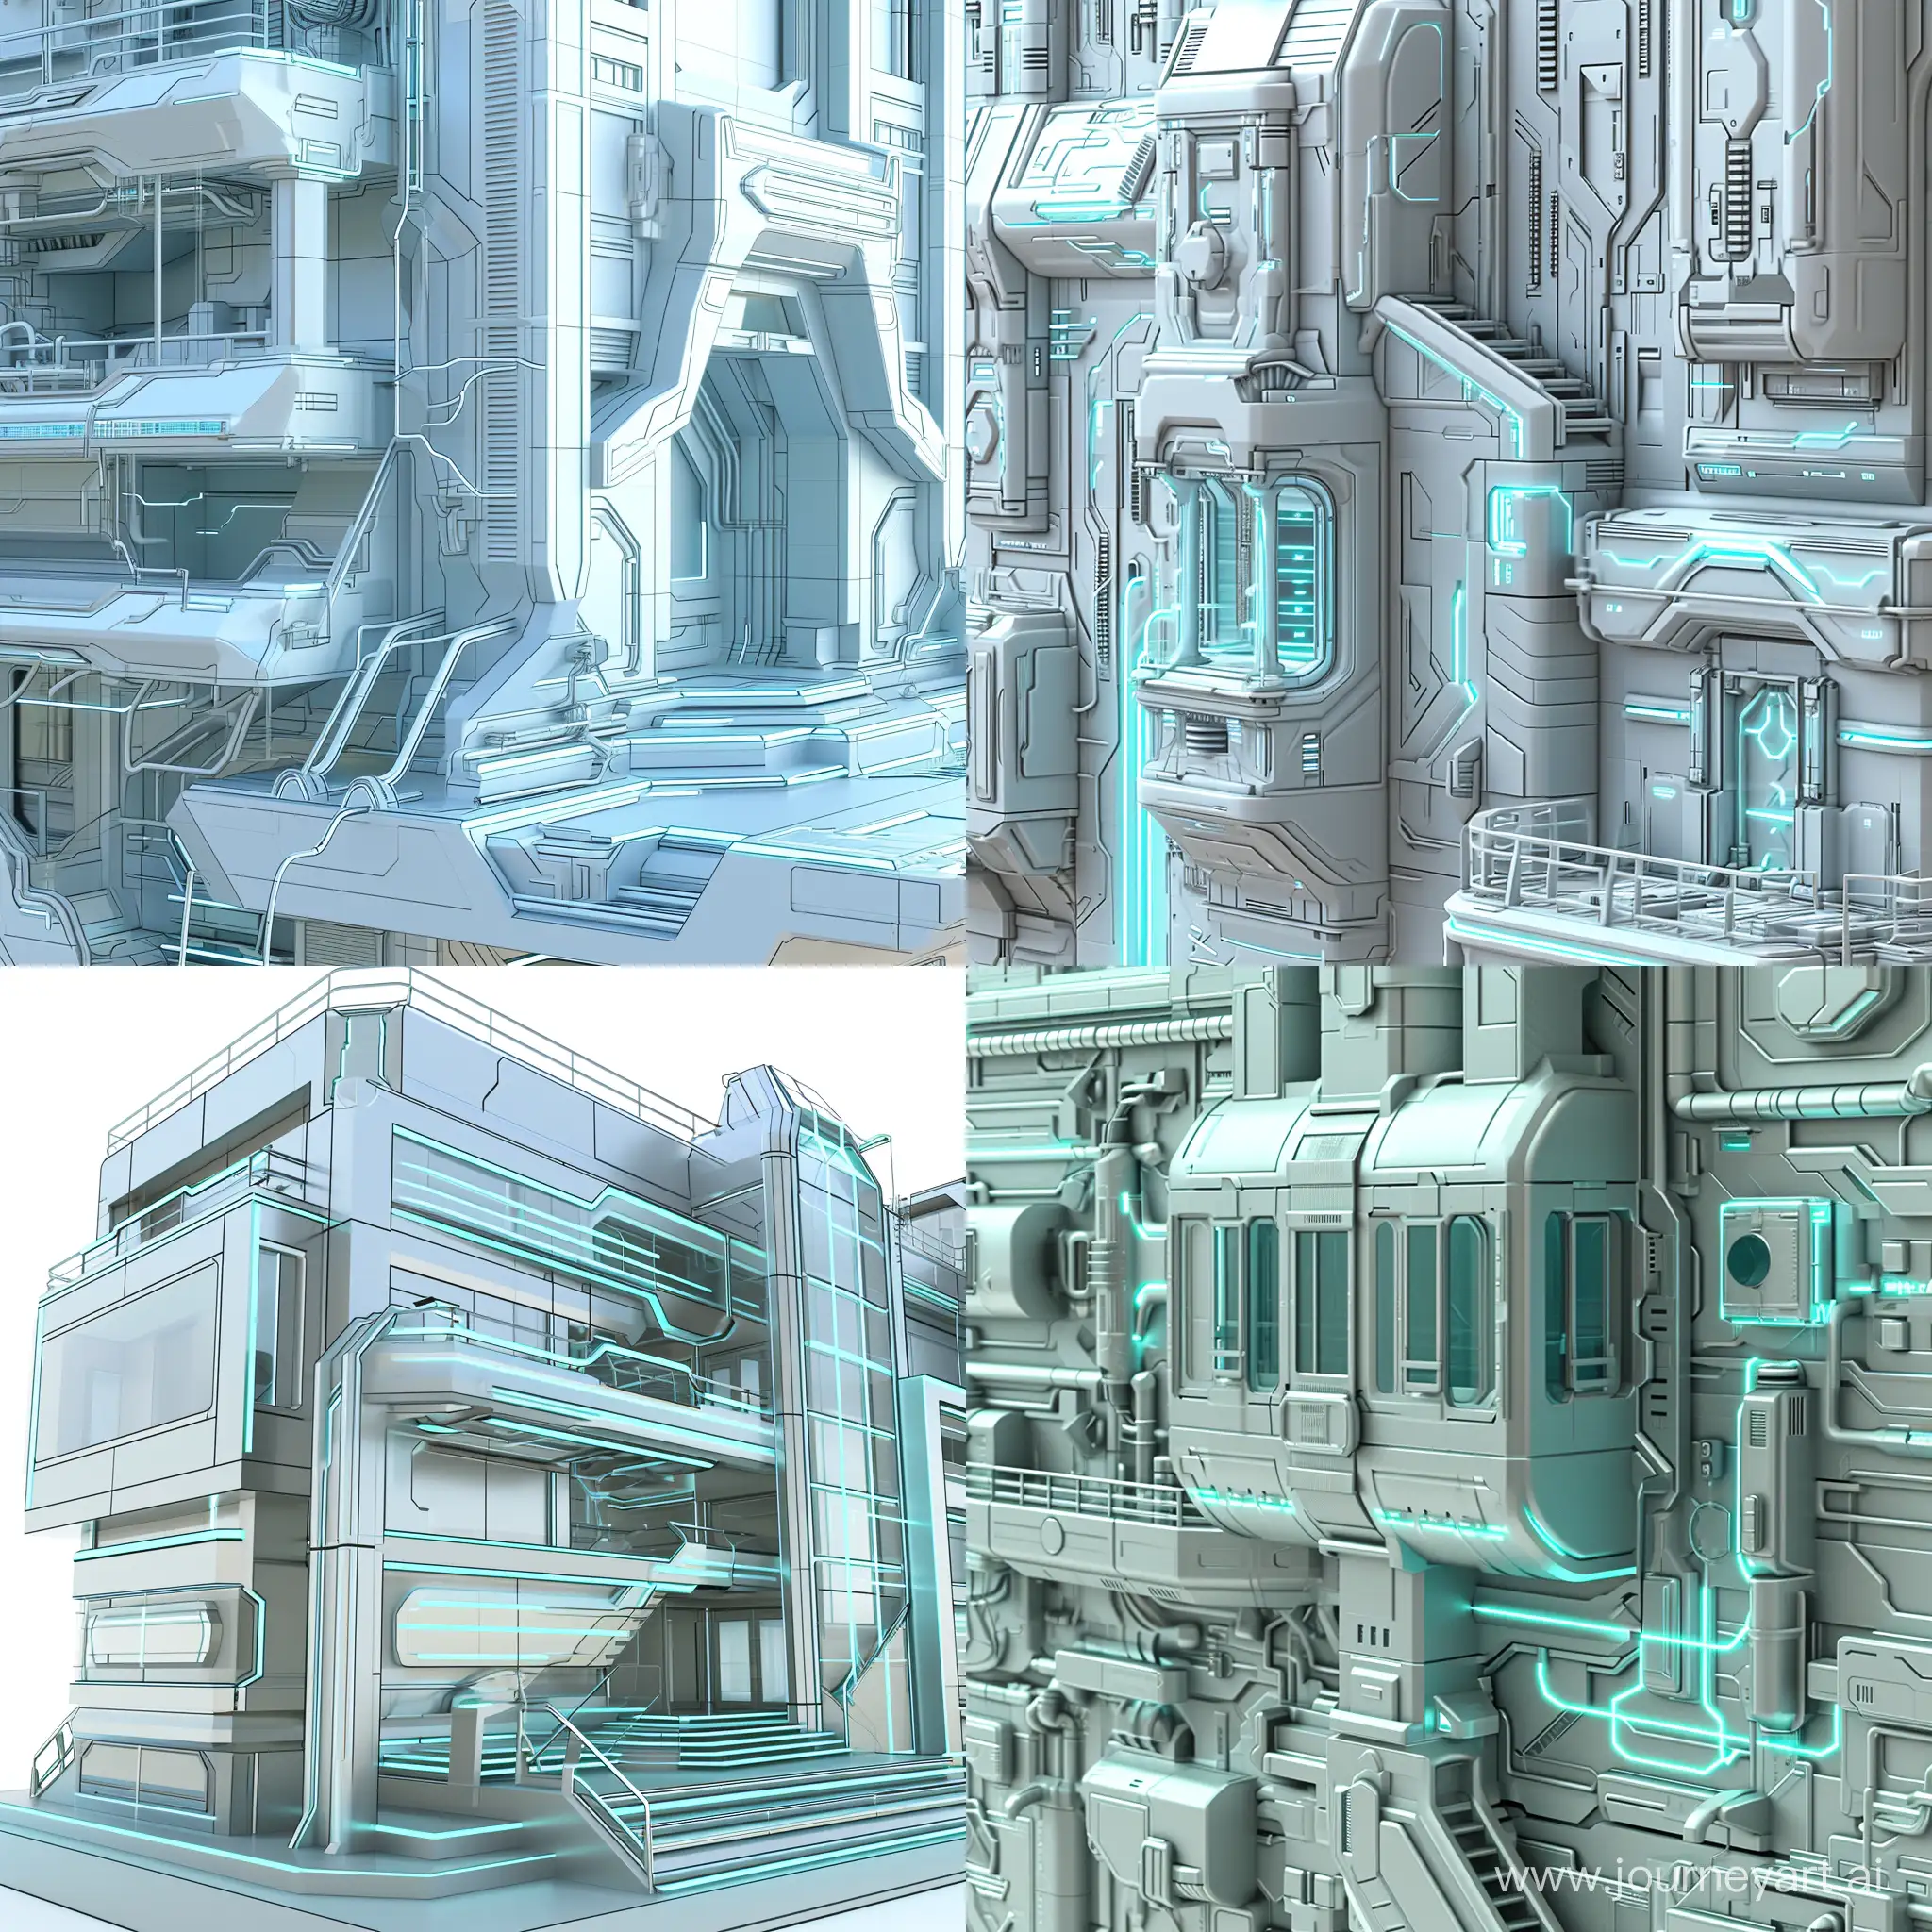 Futuristic-City-Building-with-Metallic-Silver-Faade-and-Light-Blue-Energy-Lines